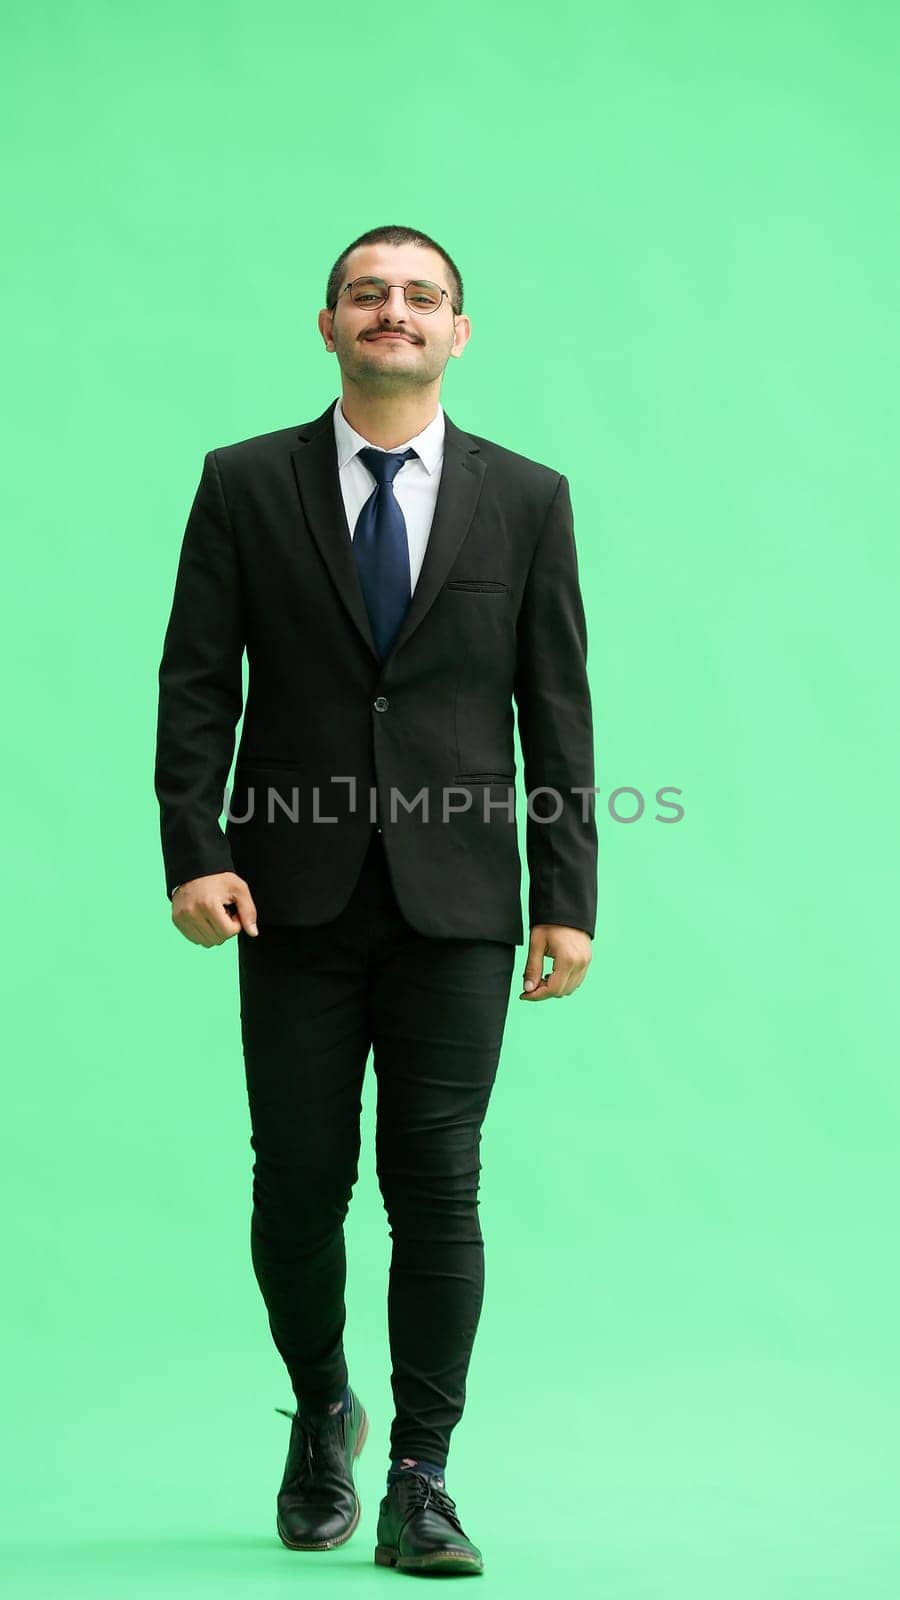 young man in full growth. isolated on green background goes by Prosto